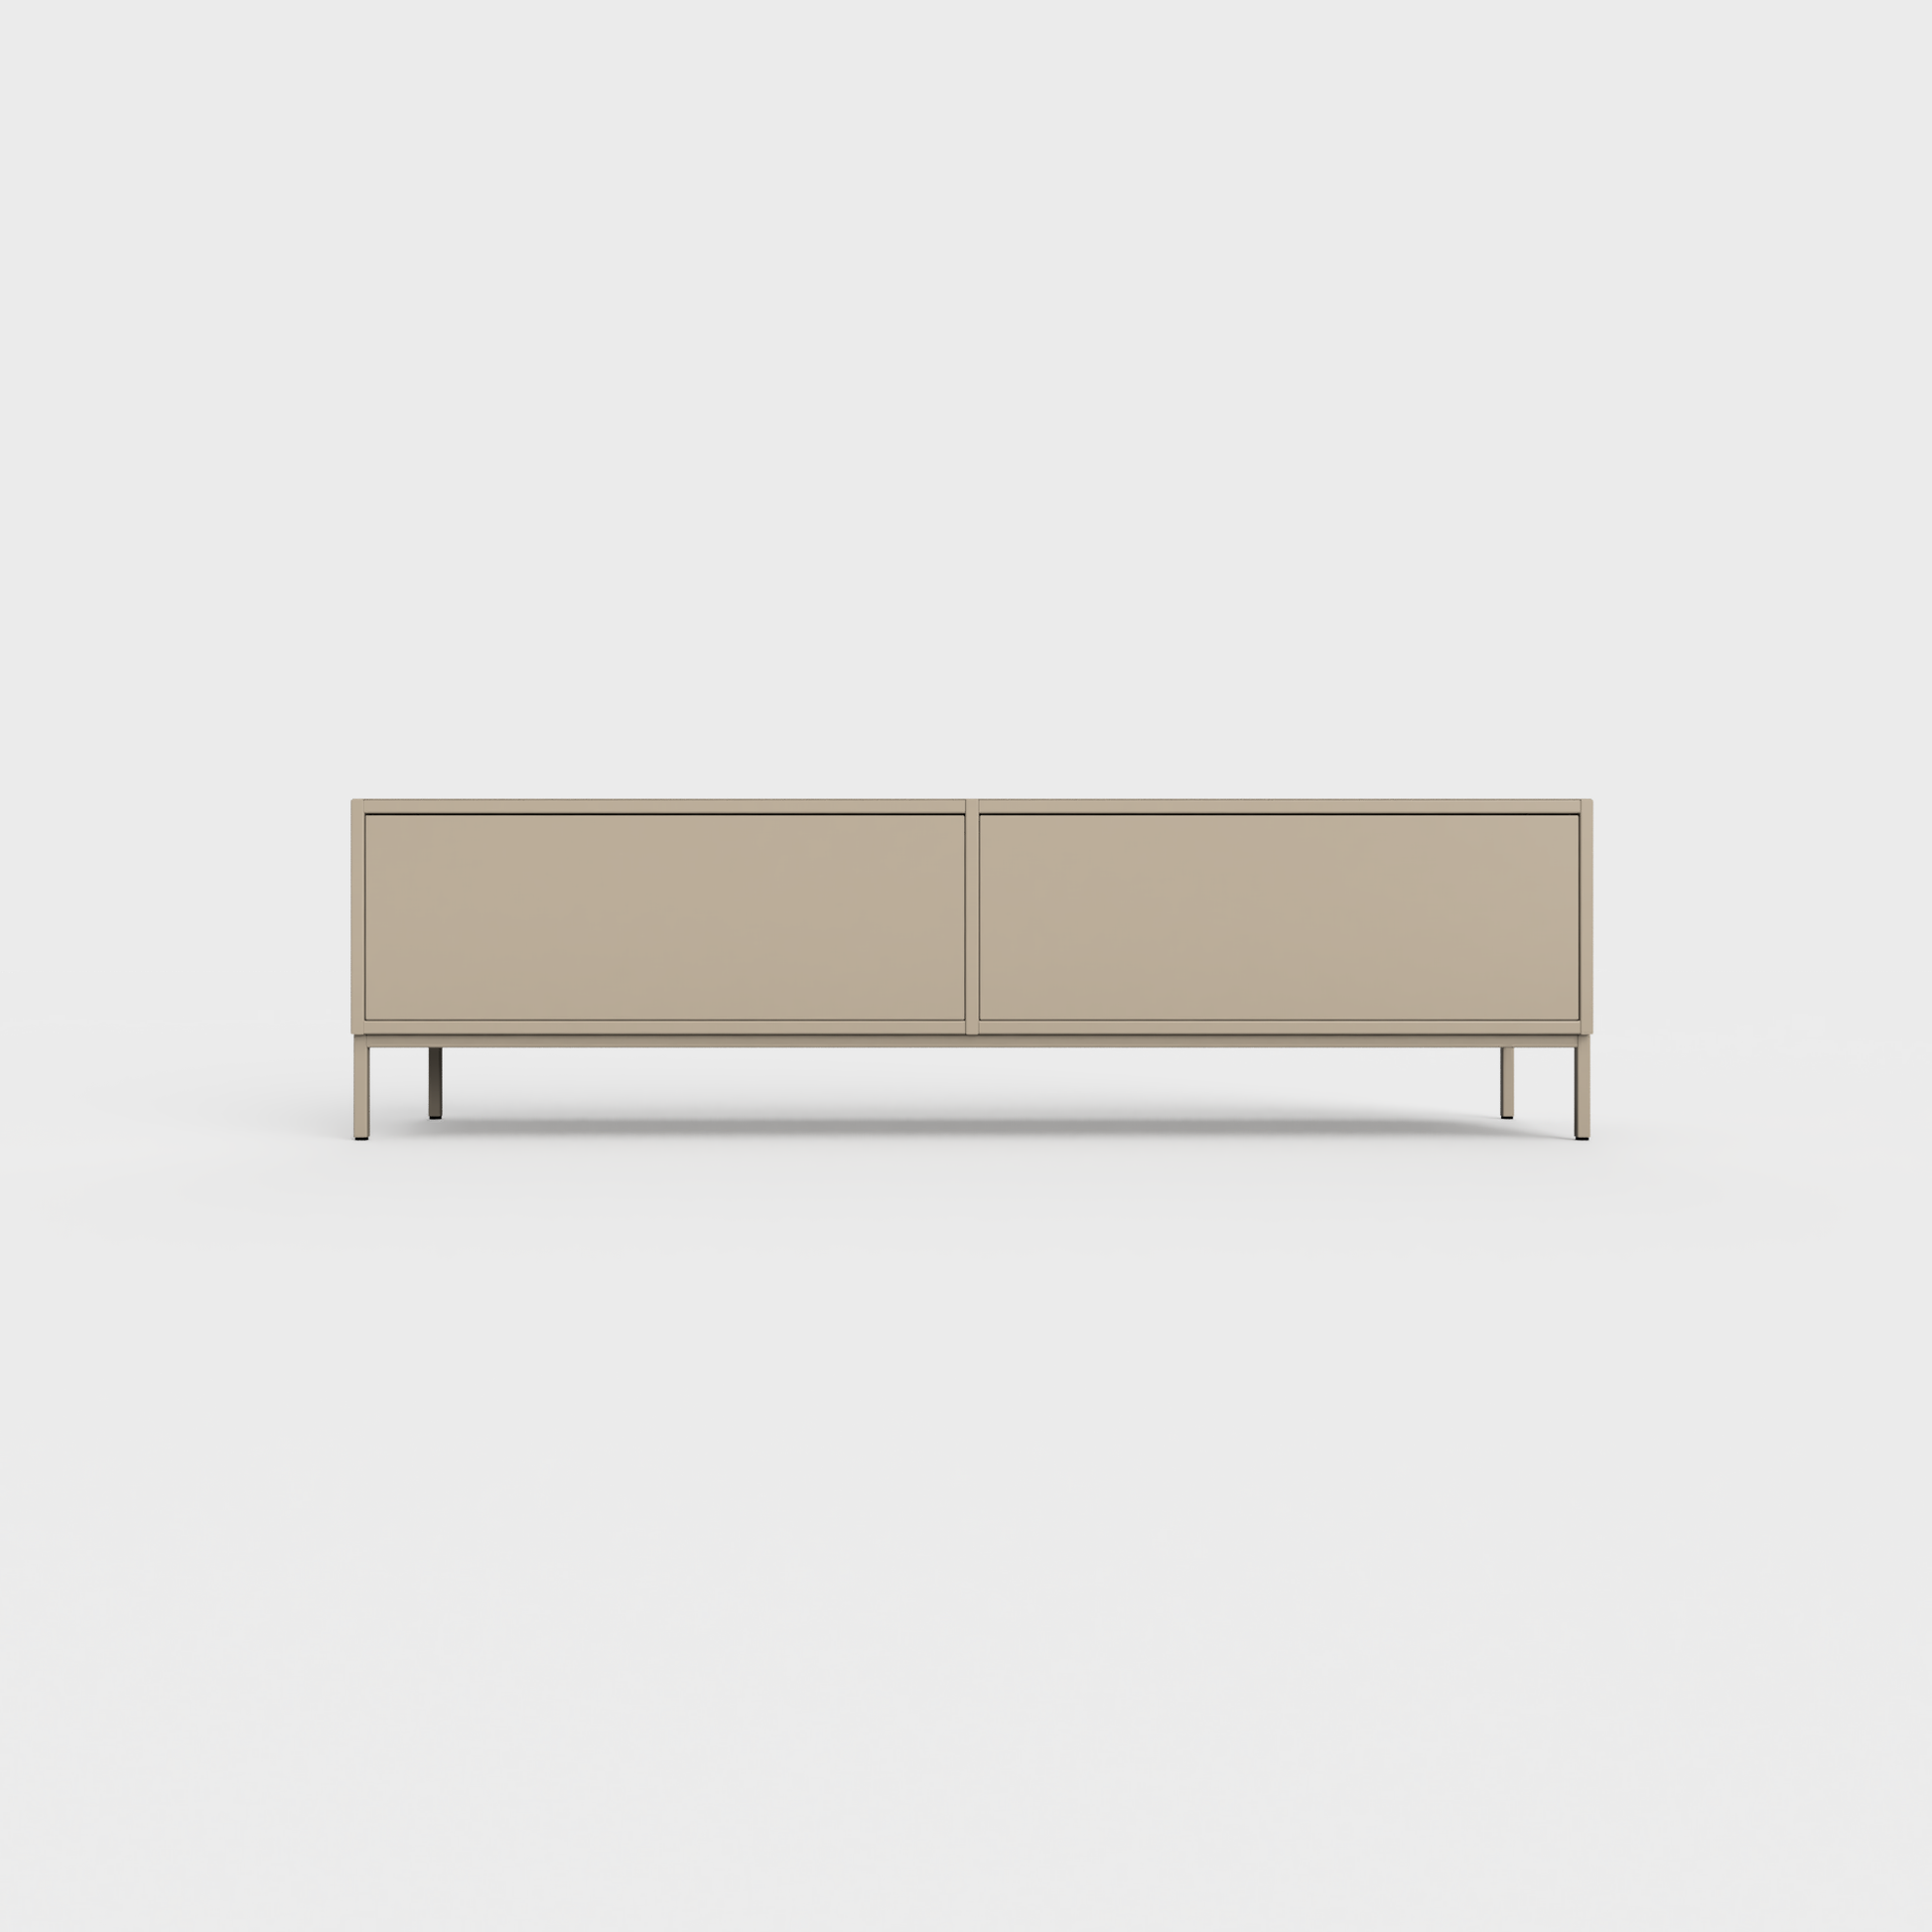 Prunus 01 Lowboard in Khaki color, powder-coated steel, elegant and modern piece of furniture for your living room